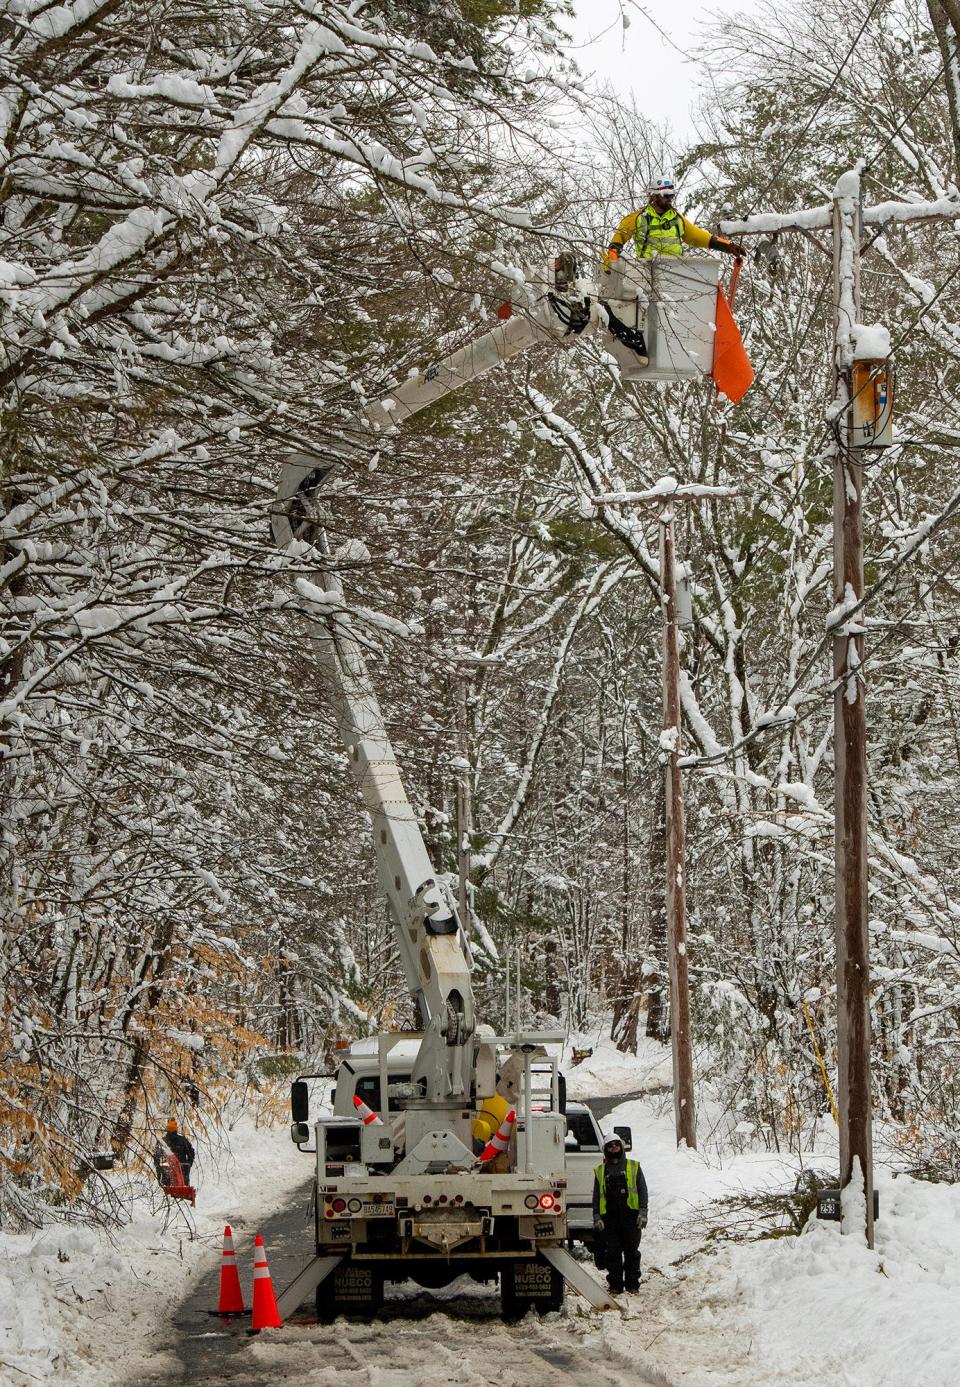 A lineman works on power lines on Mill Glen Road in Winchendon near the Gardner town line Wednesday.